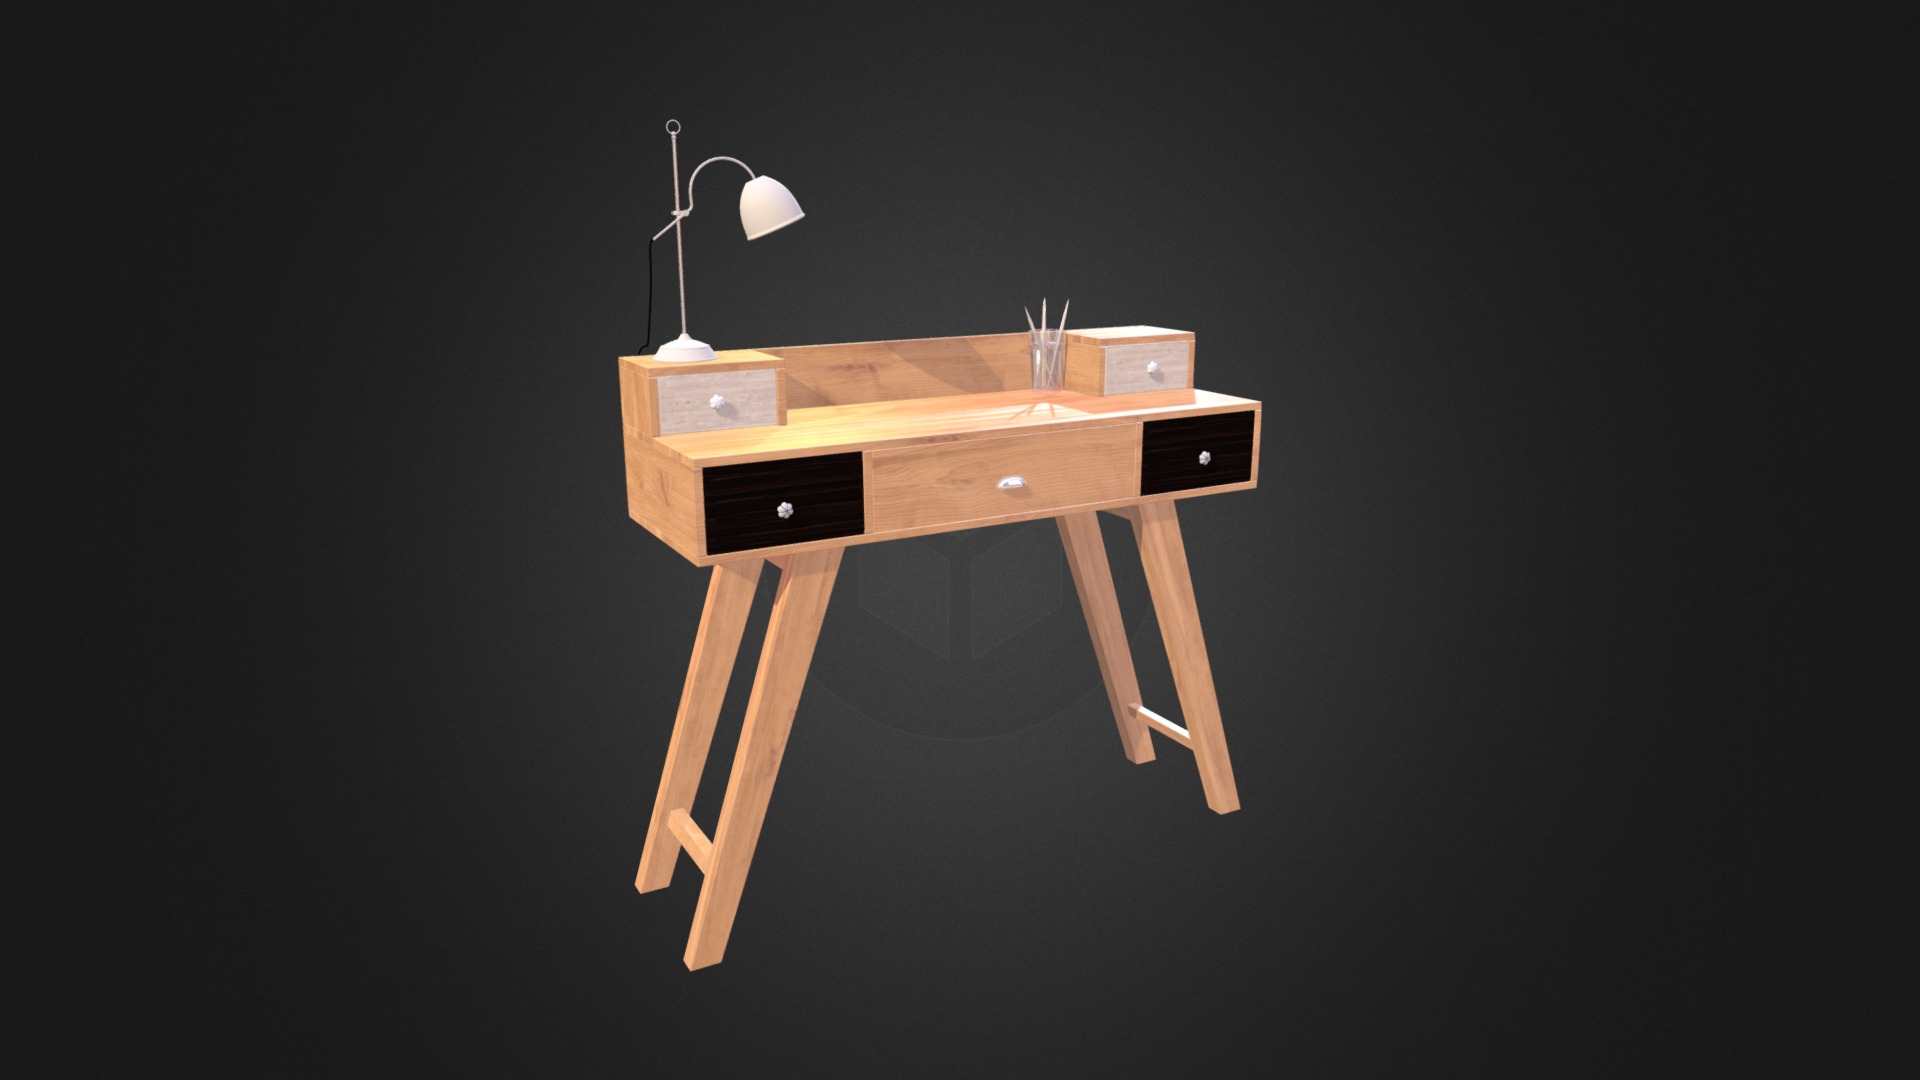 3D model RETRO DESK - This is a 3D model of the RETRO DESK. The 3D model is about a wooden table with a lamp on top.